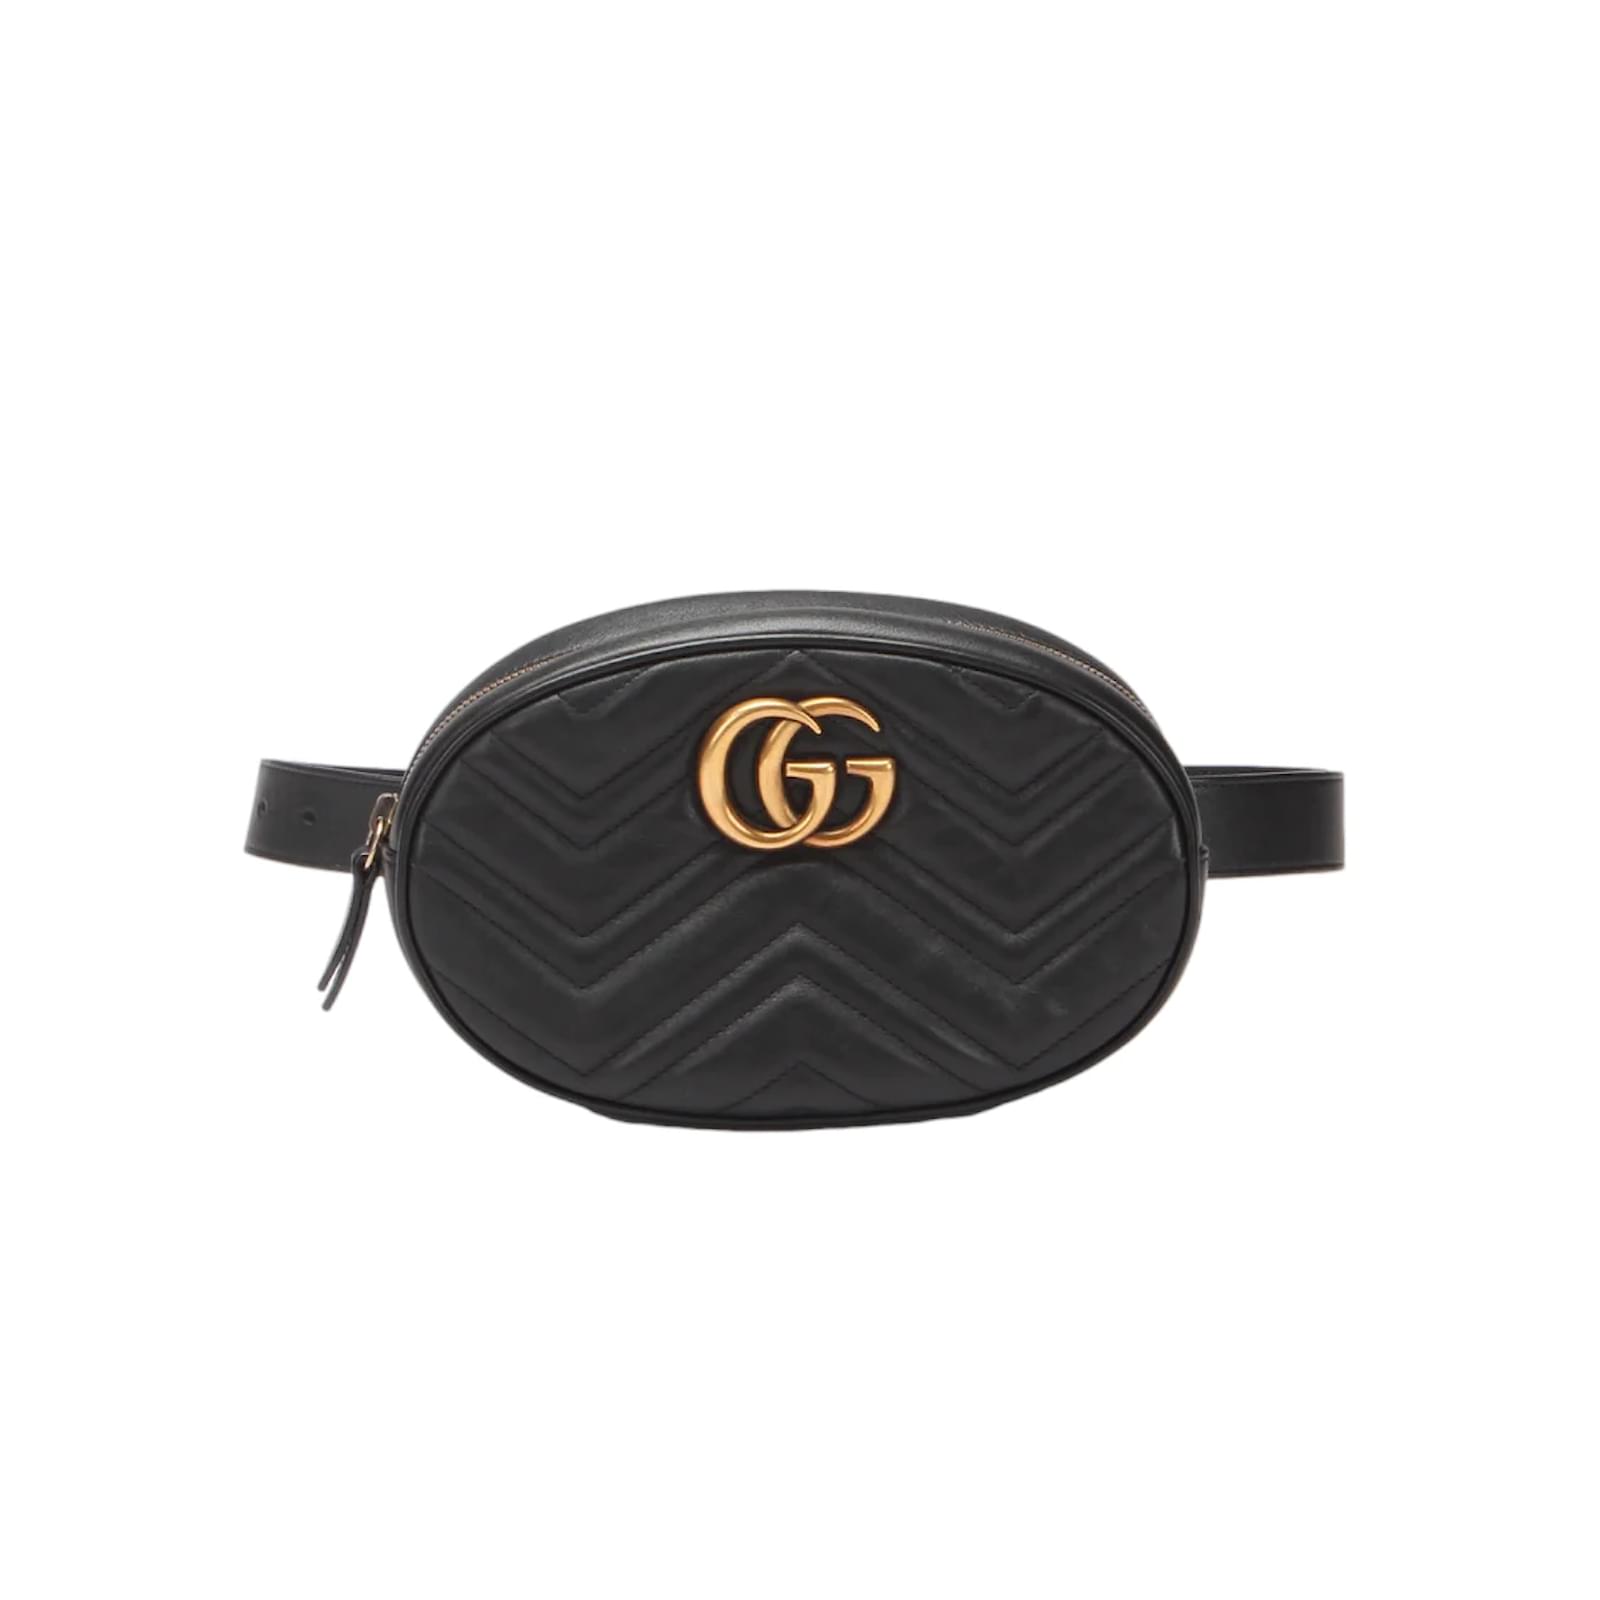 GUCCI Marmont Quilted-Leather Cross-Body Bag in BLACK | Endource